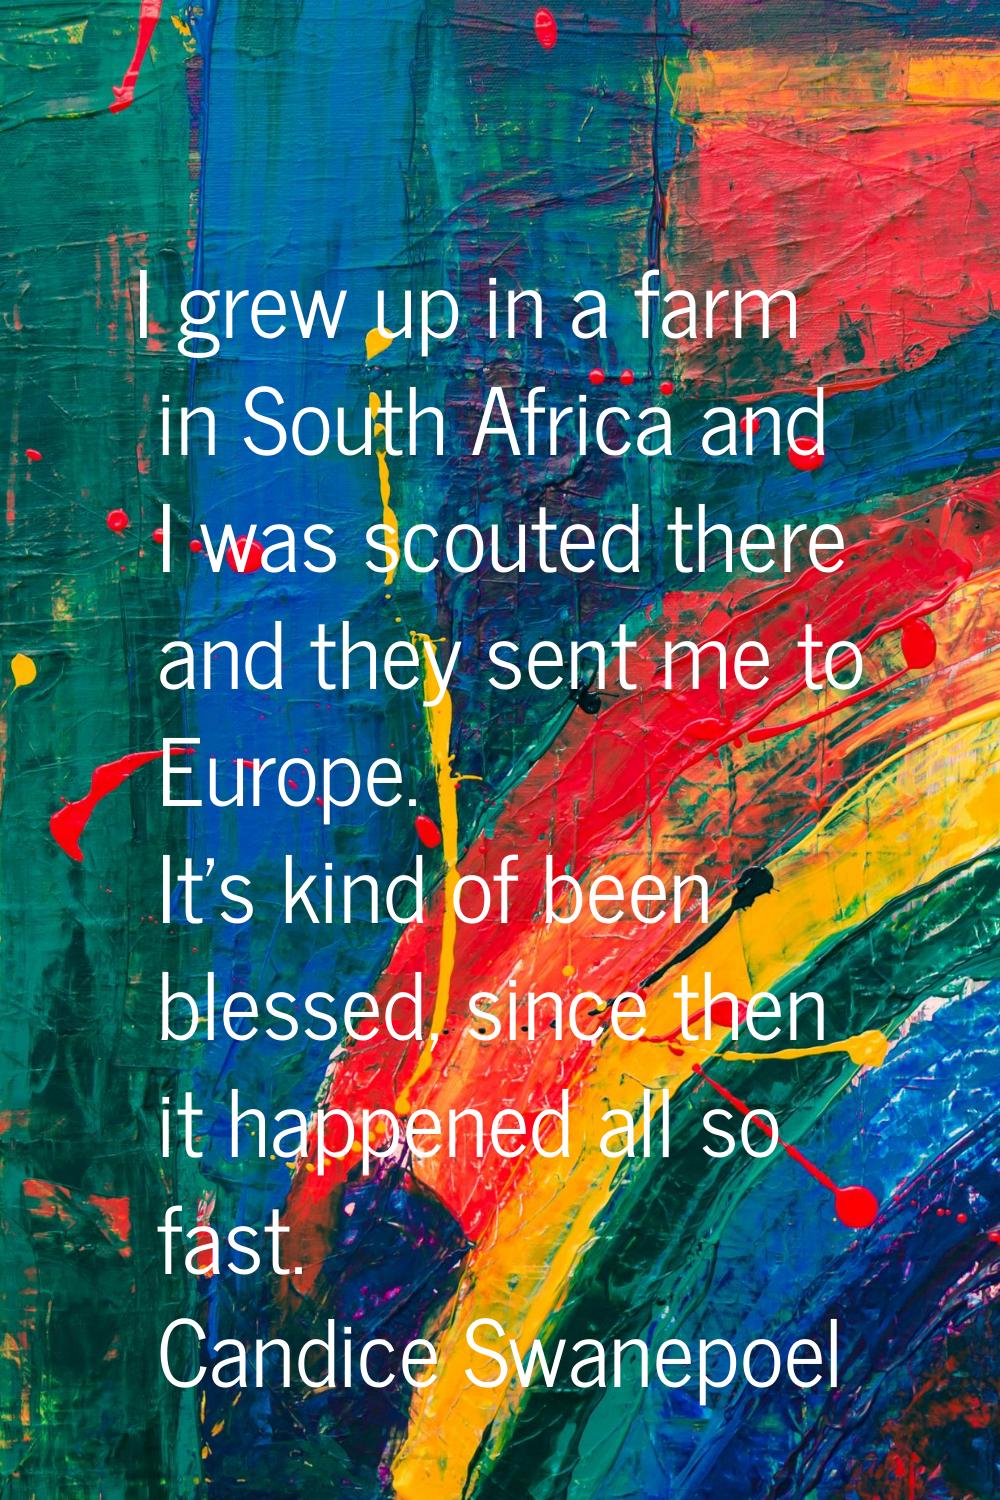 I grew up in a farm in South Africa and I was scouted there and they sent me to Europe. It's kind o